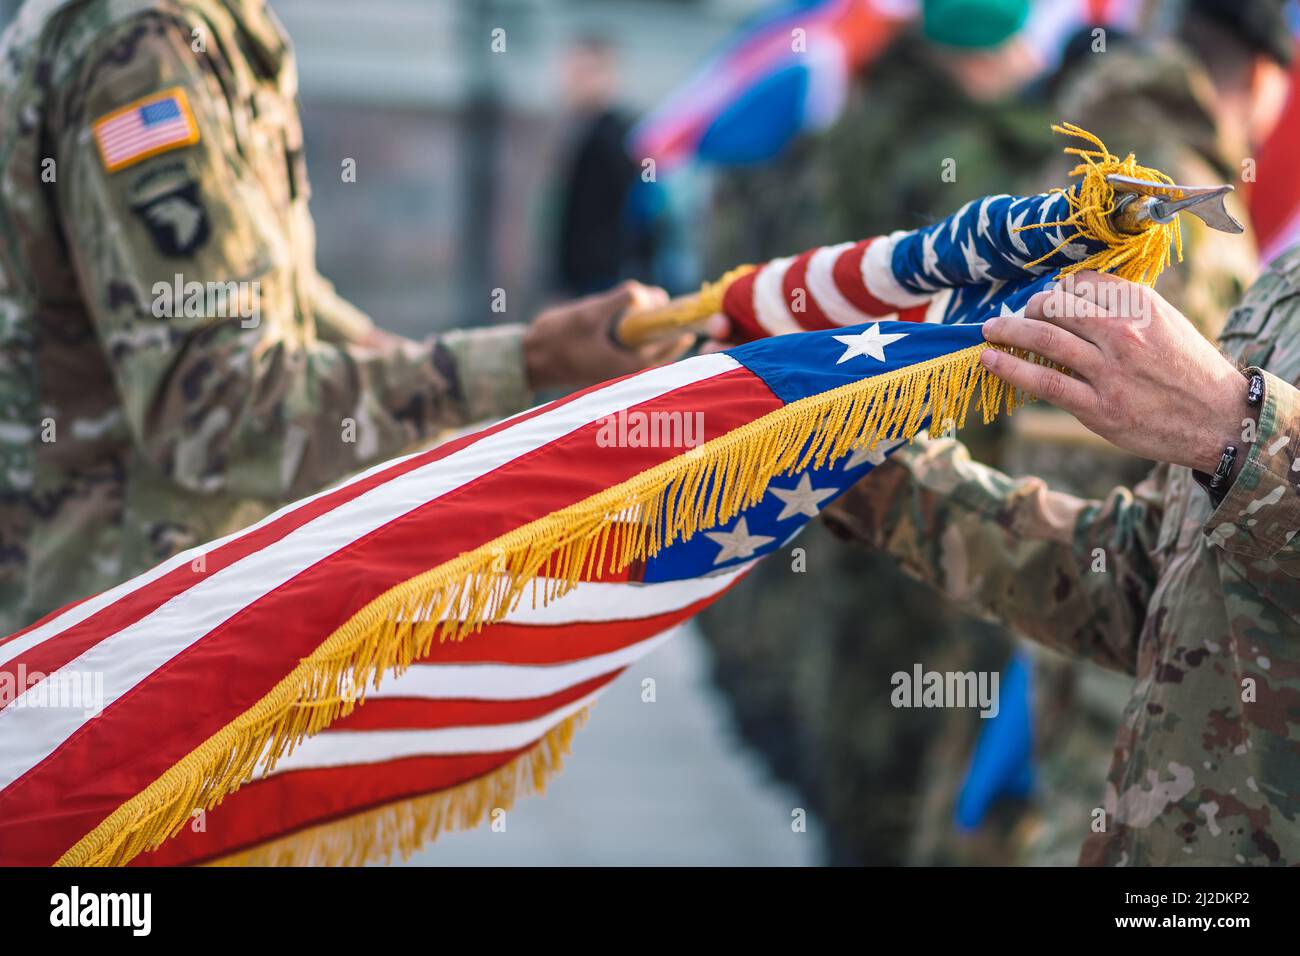 United States Marine Corps soldiers roll up American flag, USA or US army troops ready for drills or war Stock Photo